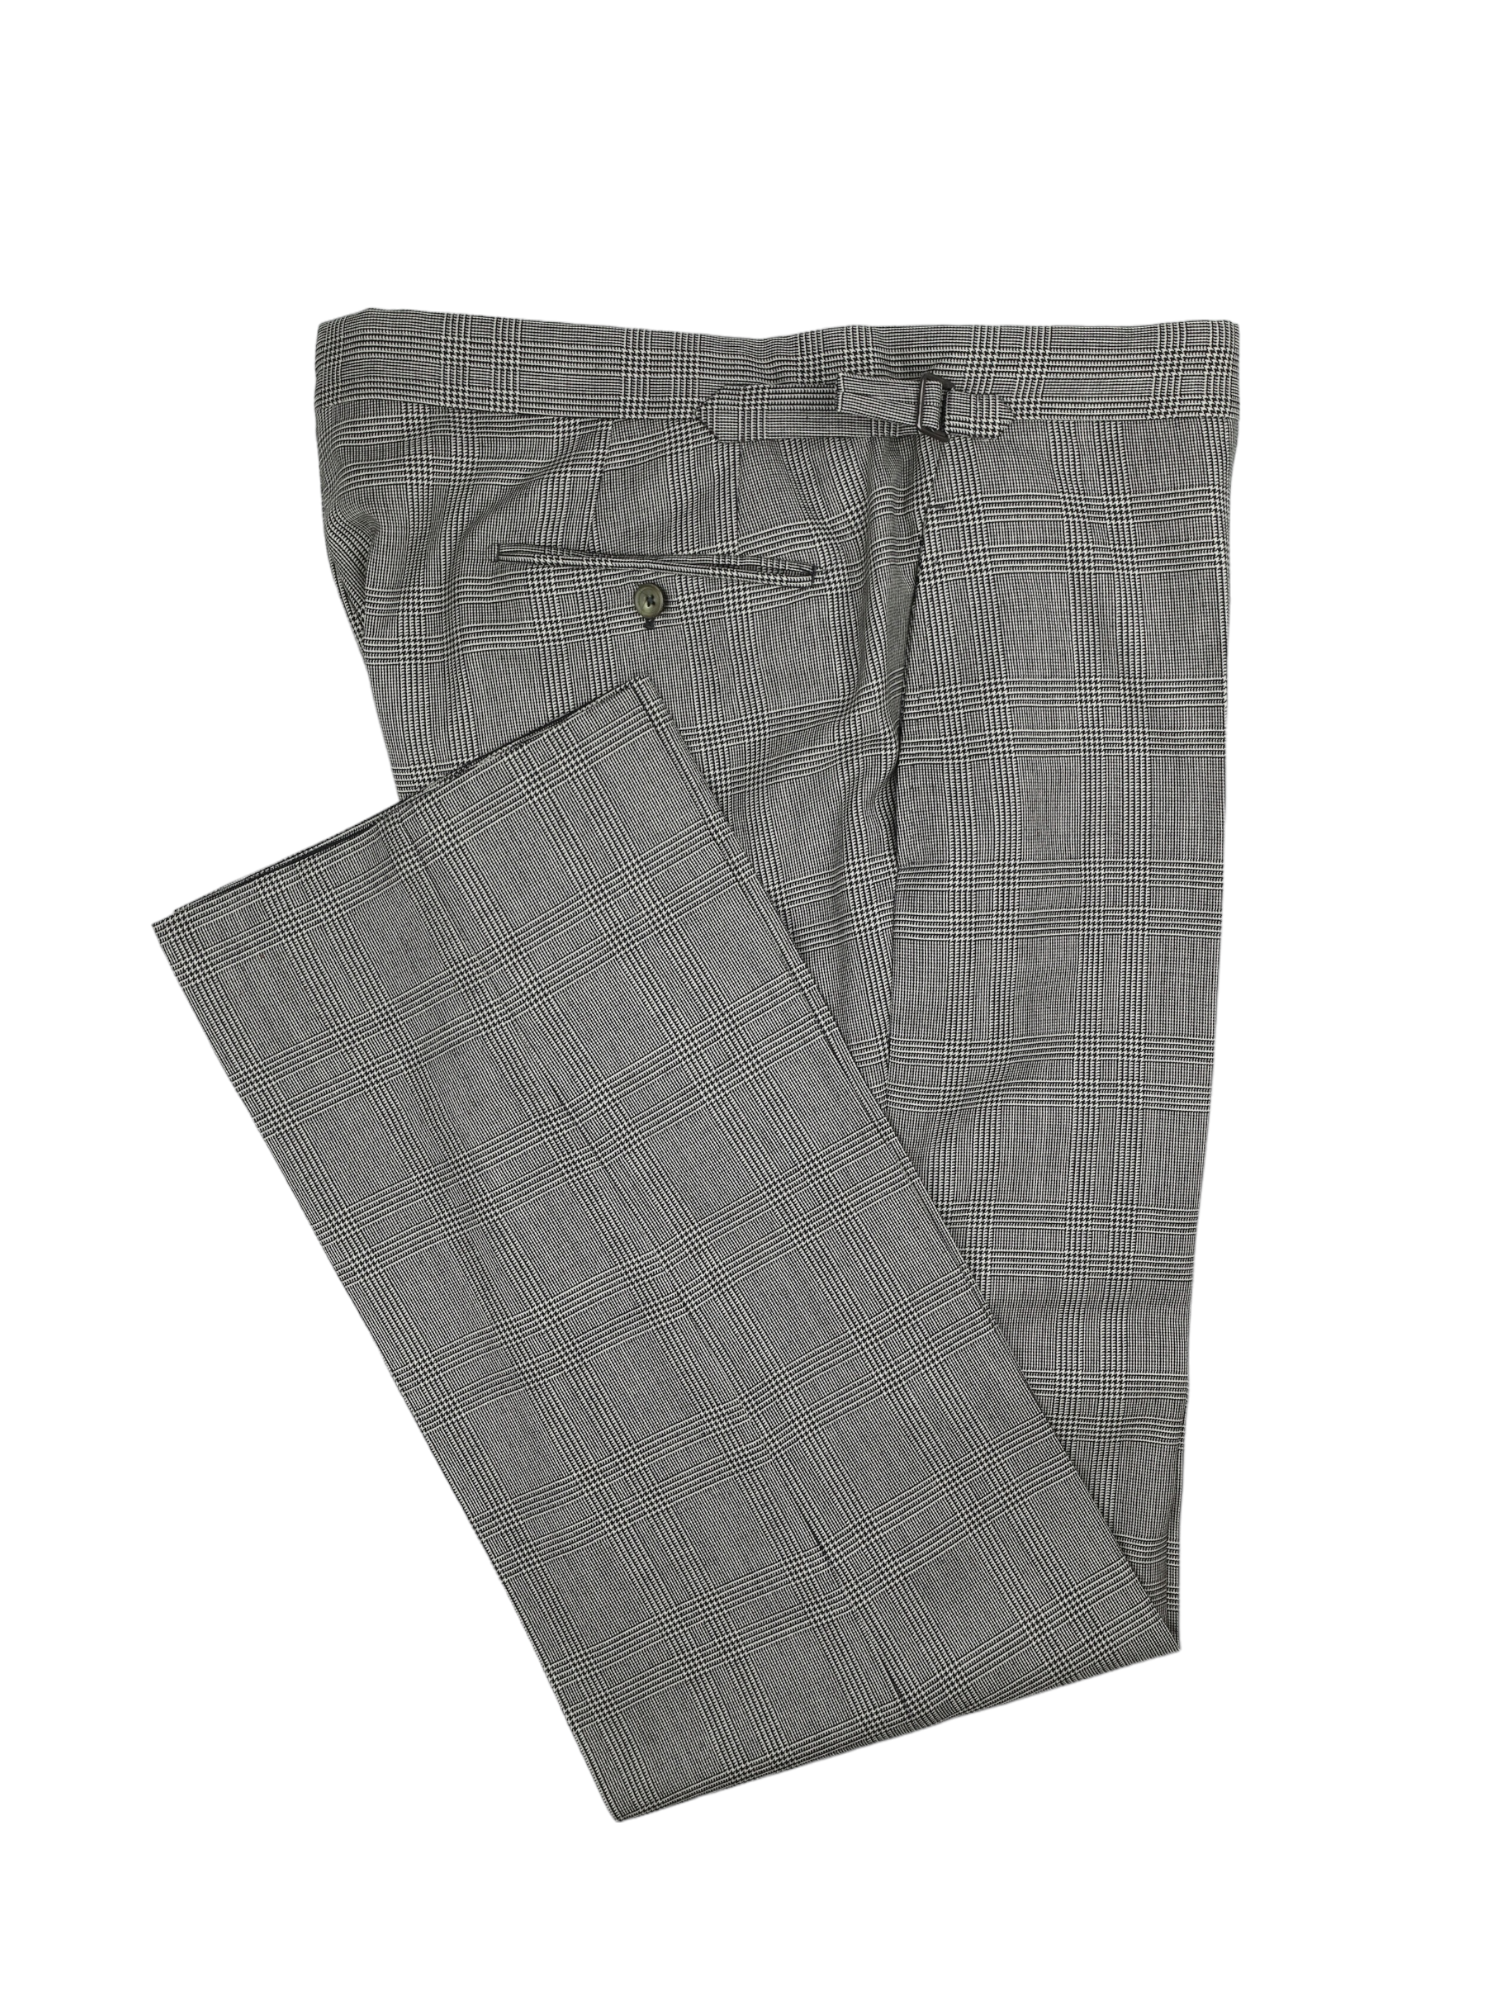 Tom Ford Grey 3-Piece Prince of Wales Windsor Suit